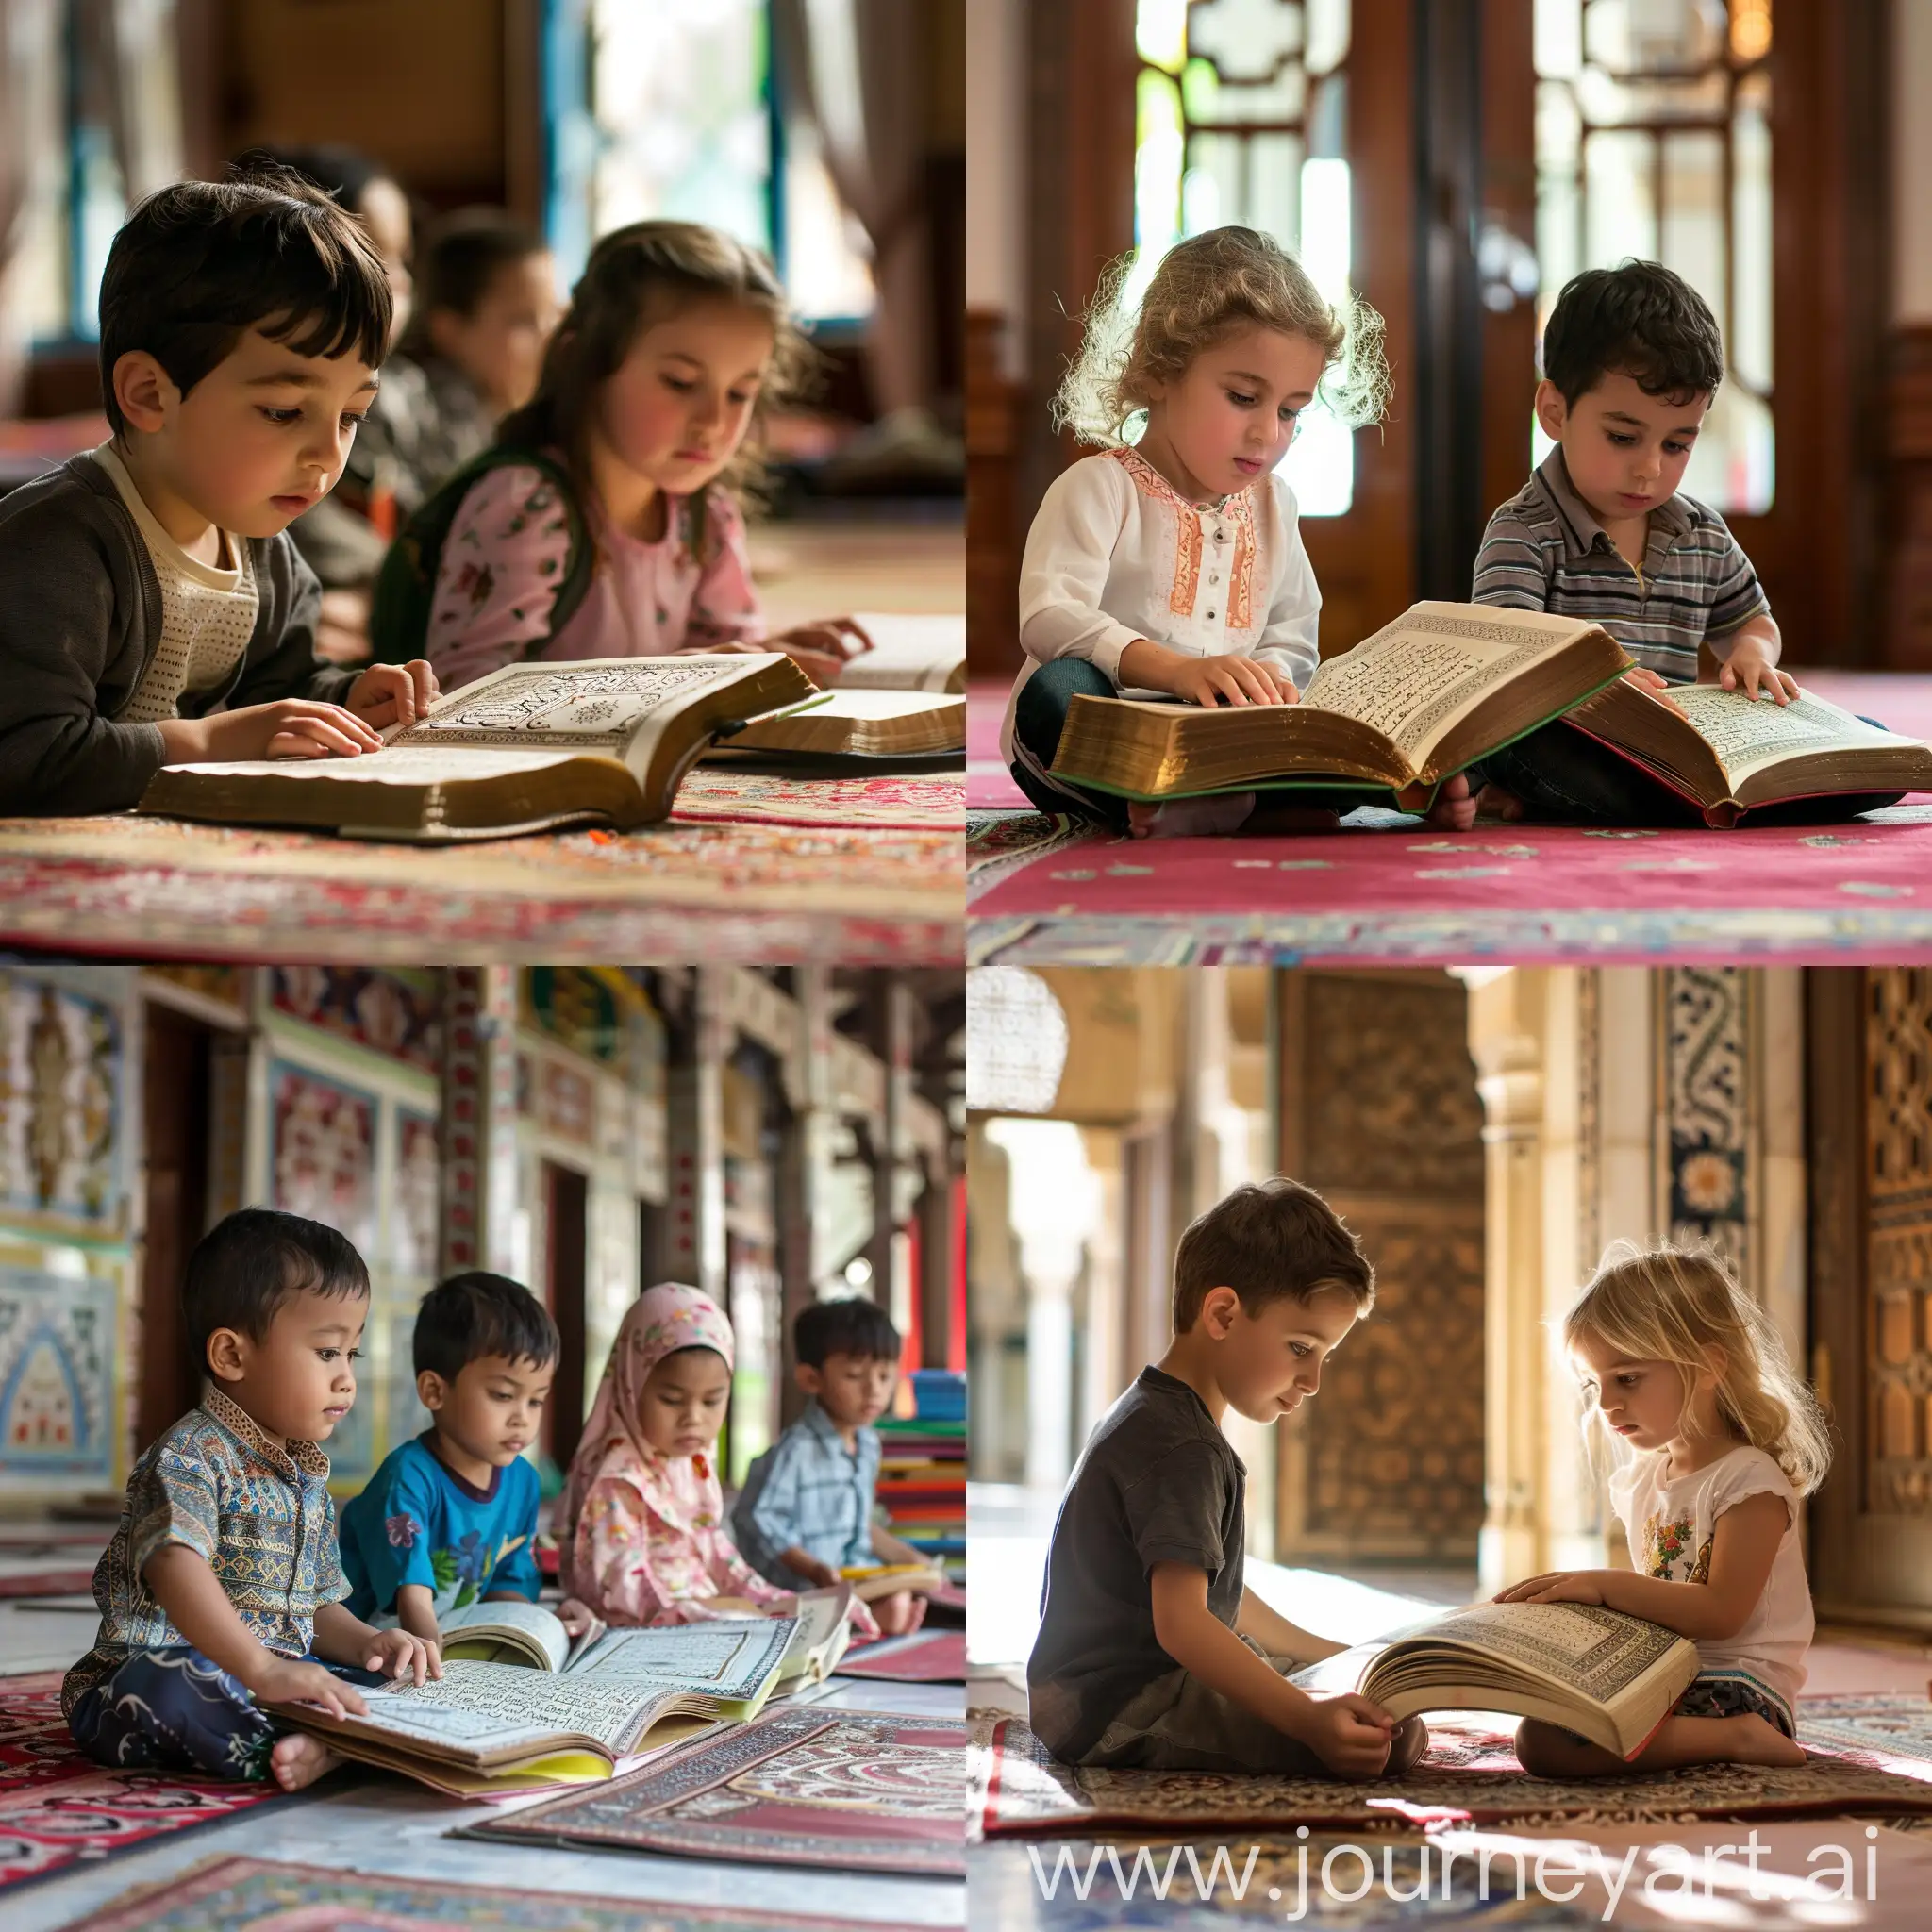 Joyful-Children-Engaging-with-Quran-at-Mosque